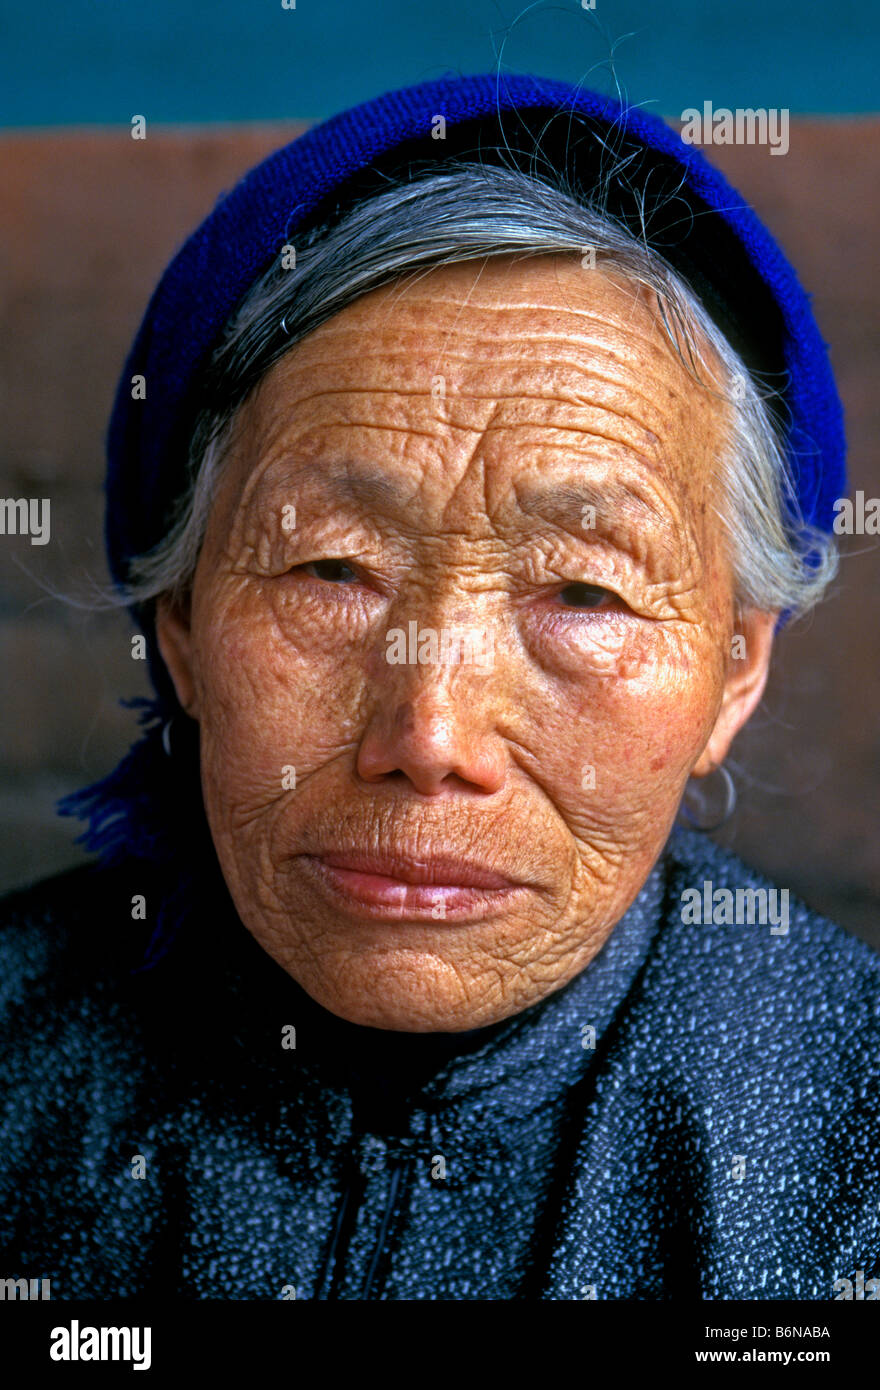 1, one, Chinese woman, old woman, elderly woman, mature woman, senior  citizen, head shot, portrait, eye contact, front view, Beijing, China, Asia  Stock Photo - Alamy